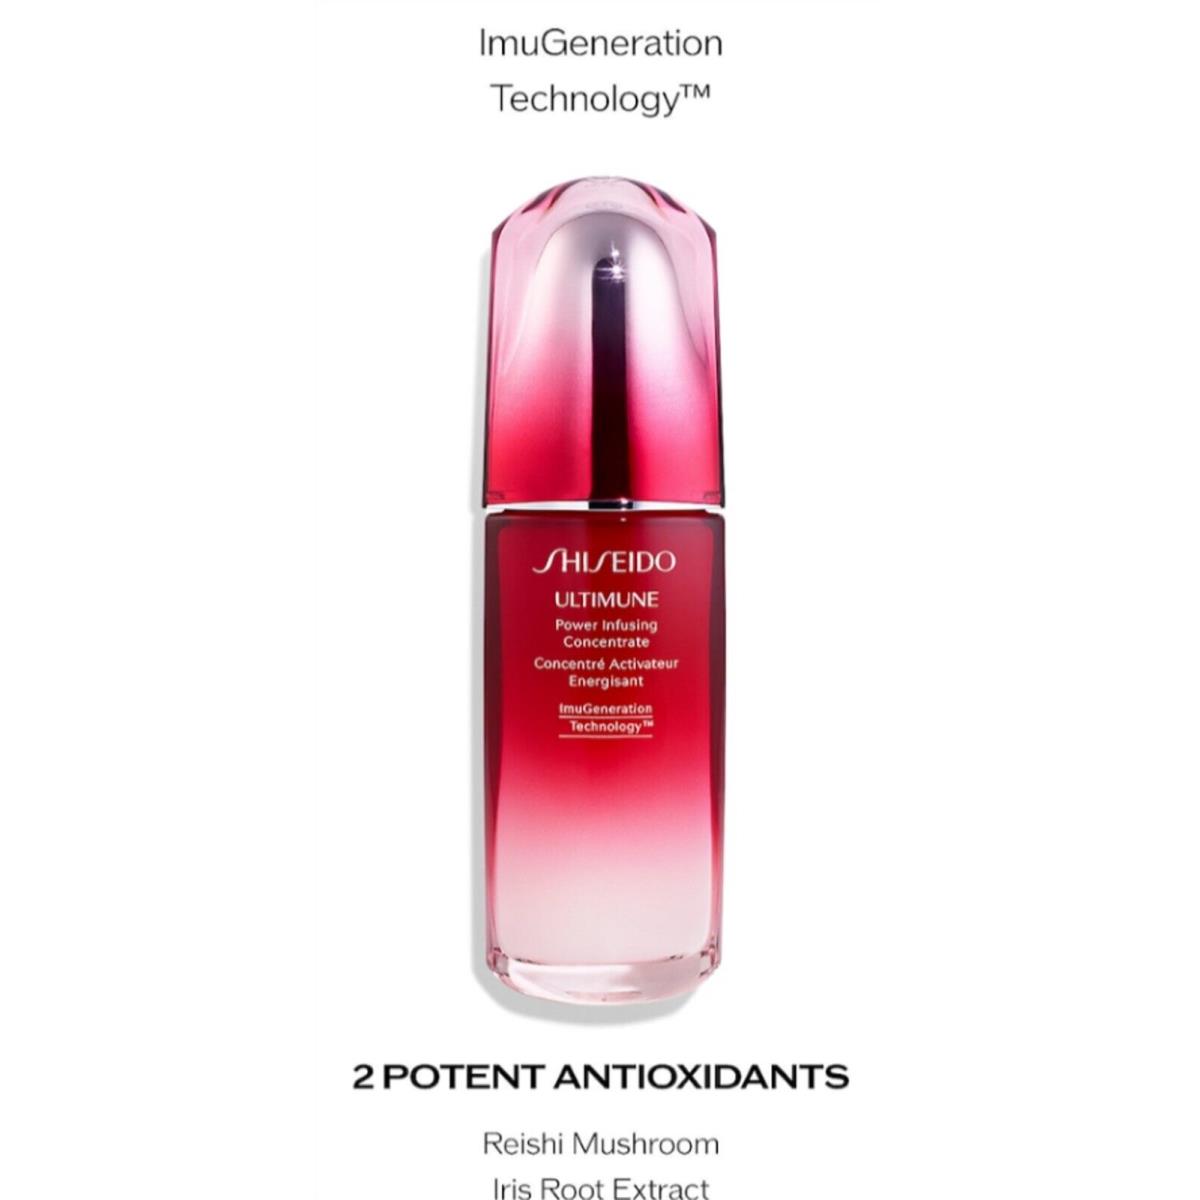 Shiseido Ultimune Power Infusing Concentrate 50ml 1.6oz Full Size